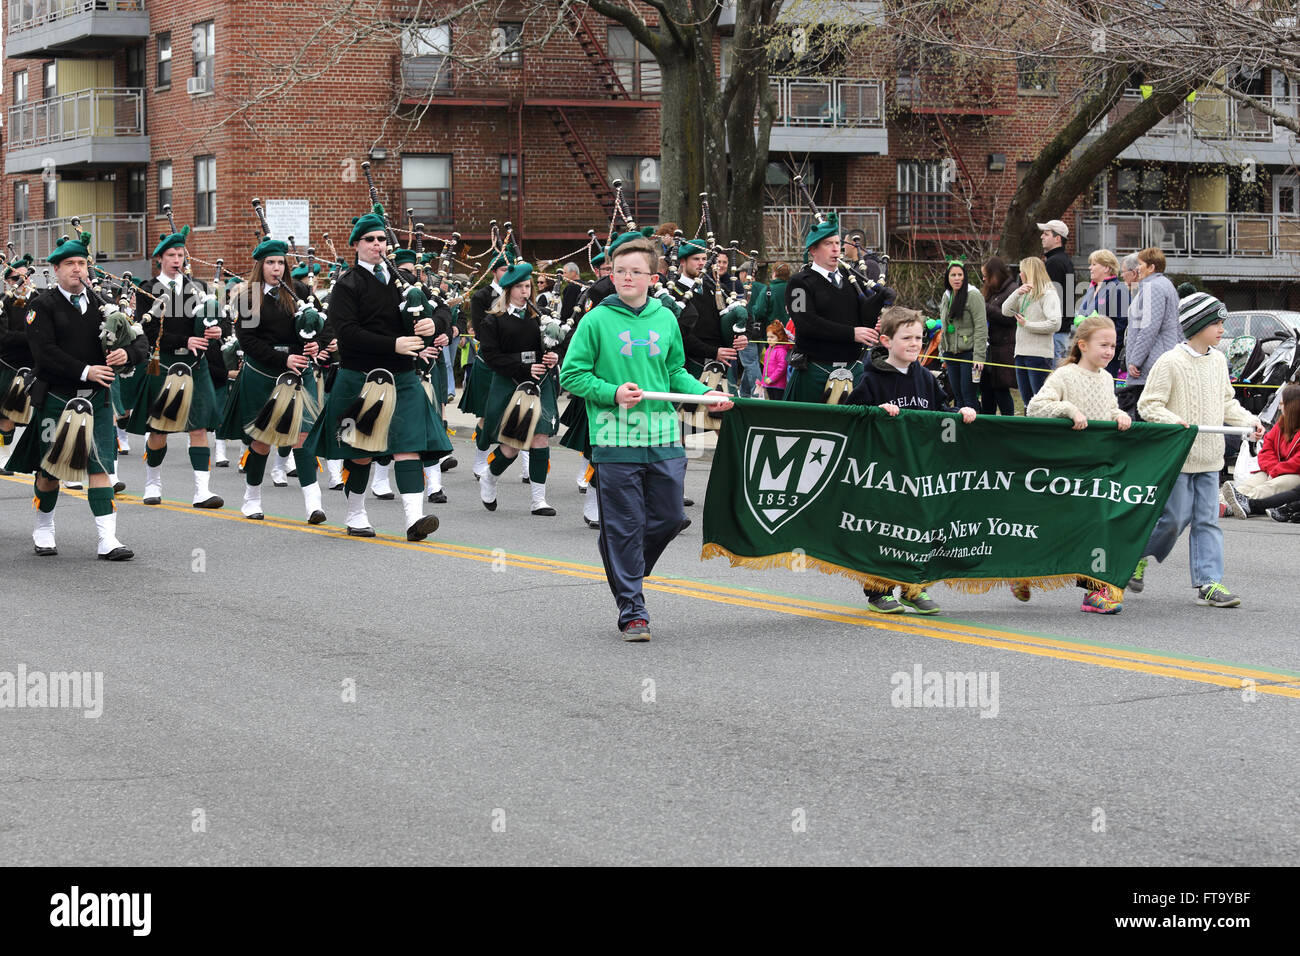 Pipes and Drums Band marching in Saint Patrick's Day Parade Yonkers, New York Banque D'Images